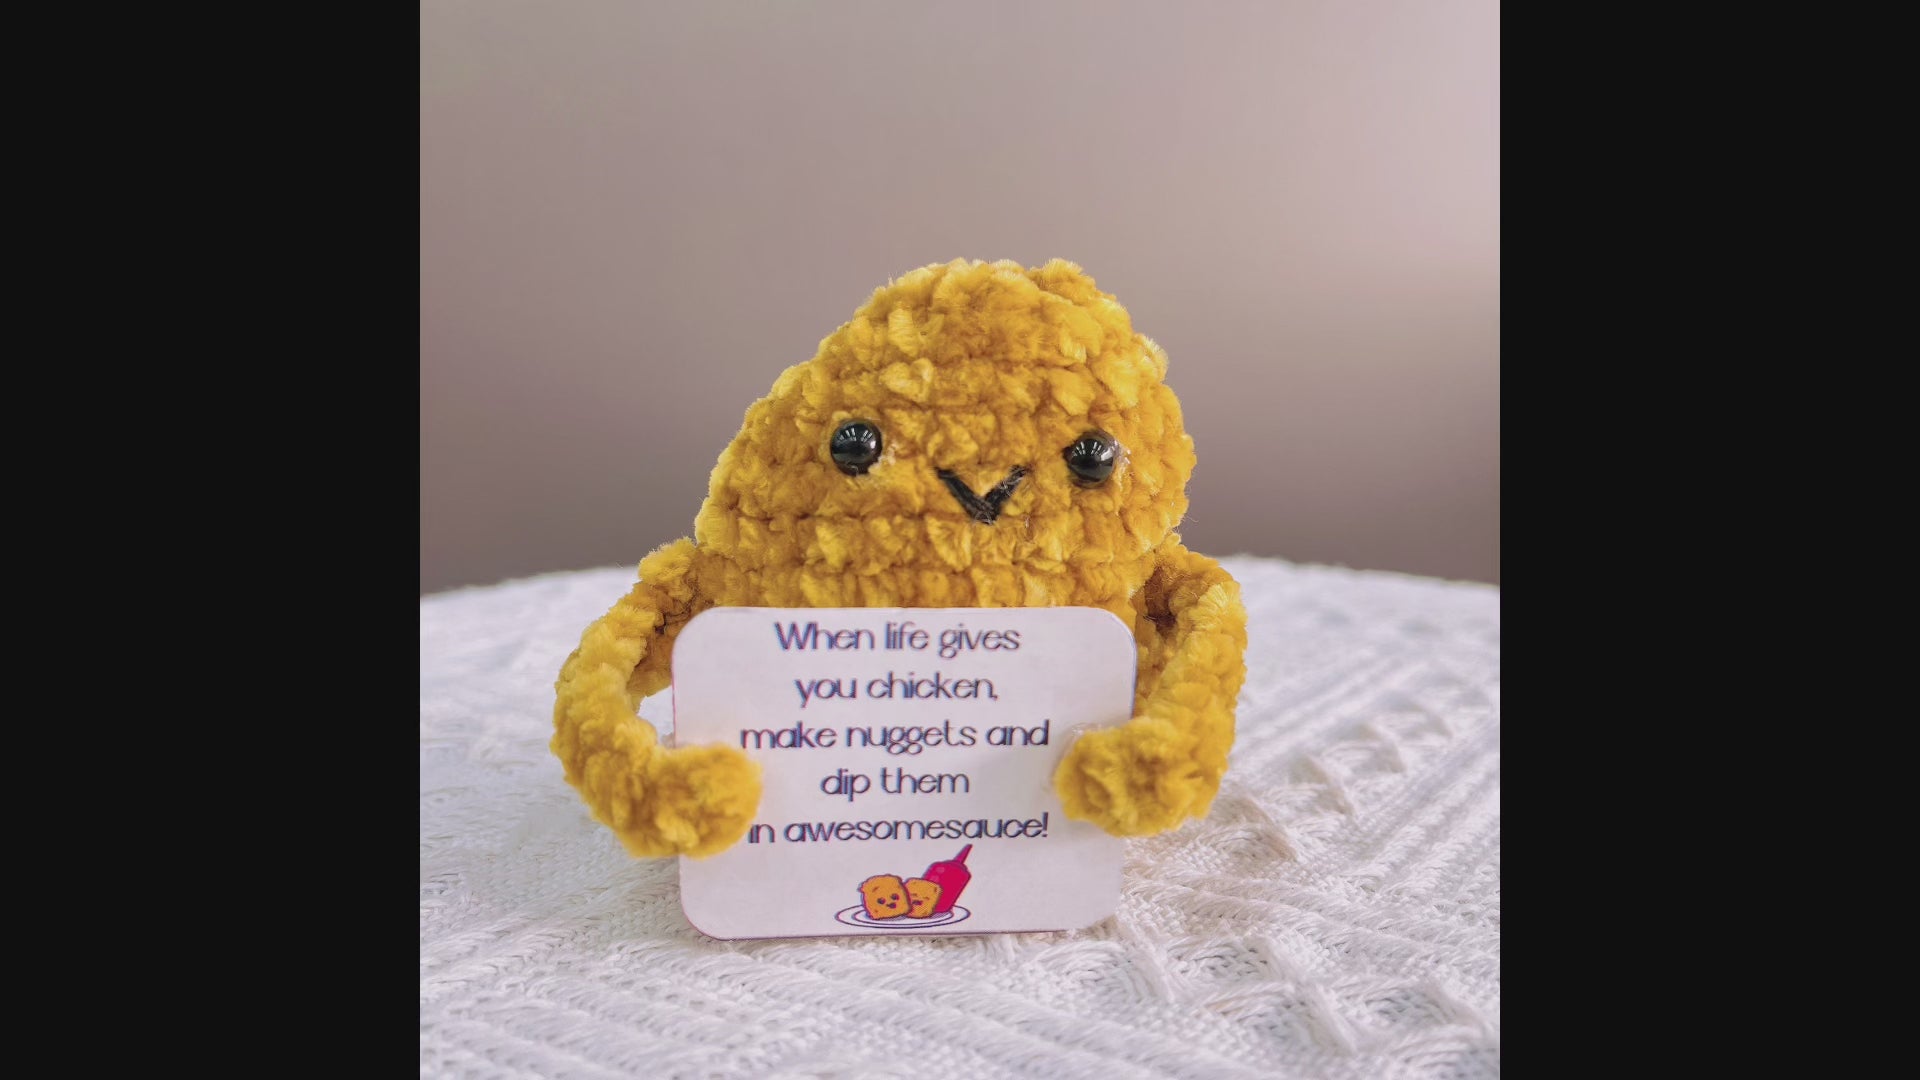 Crochet Positive Chicken Nugget Plushie with Personalized Text Custom – The  Bloom Crafter